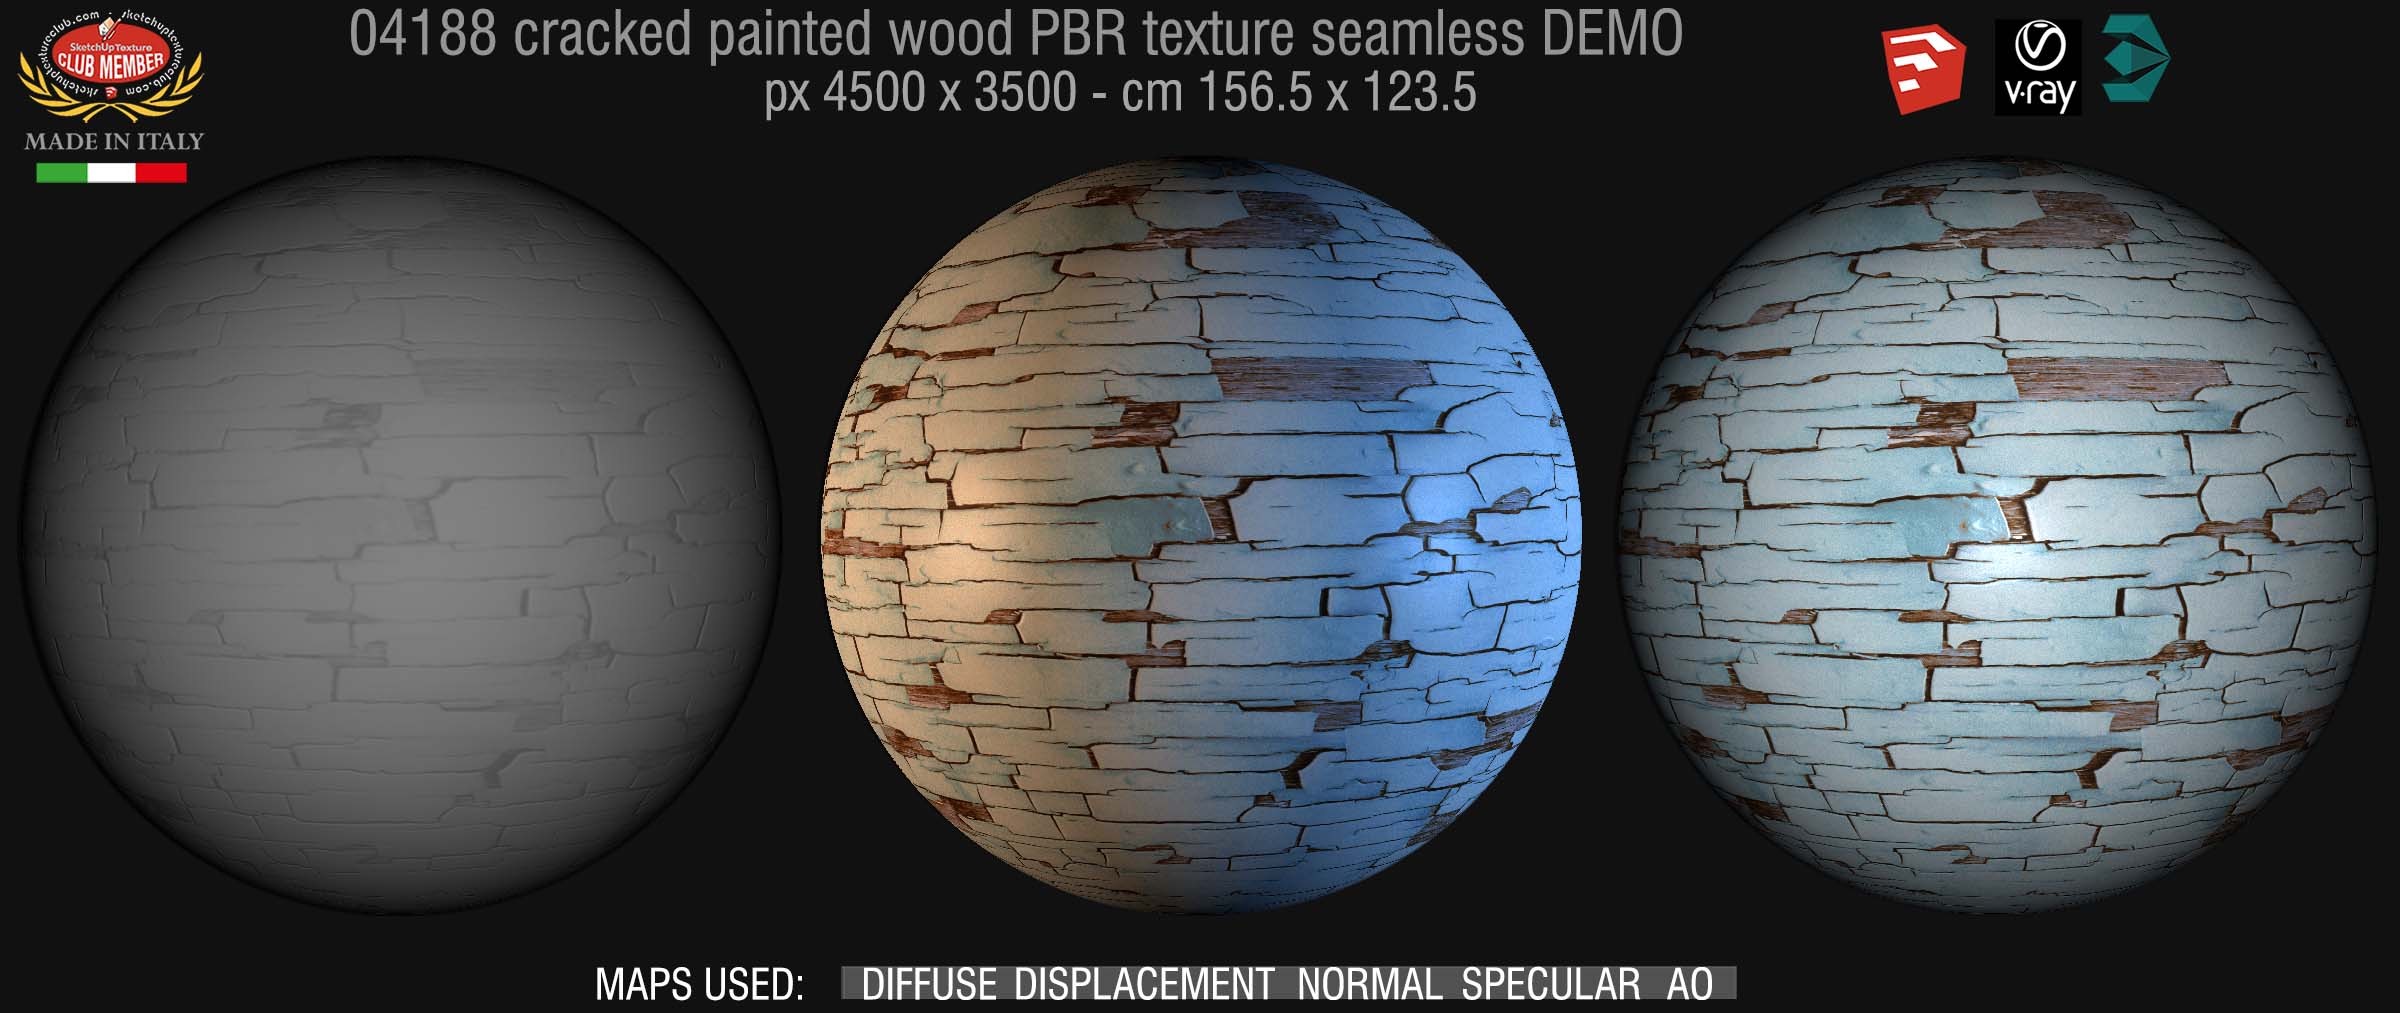 04188 cracked painted wood PBR texture seamless DEMO